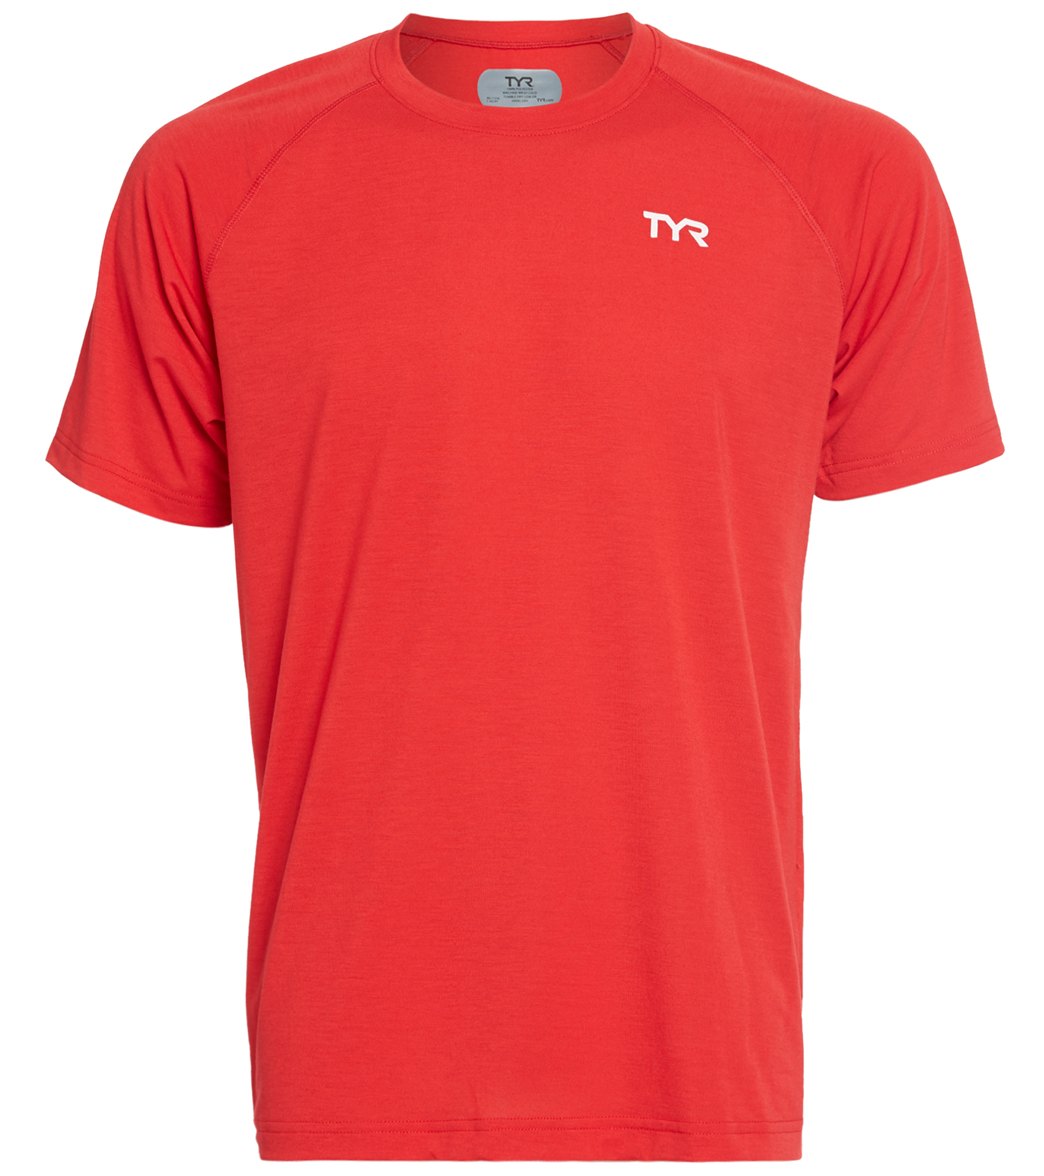 TYR Men's Alliance Tech Tee Shirt - Red Large Polyester/Spandex - Swimoutlet.com